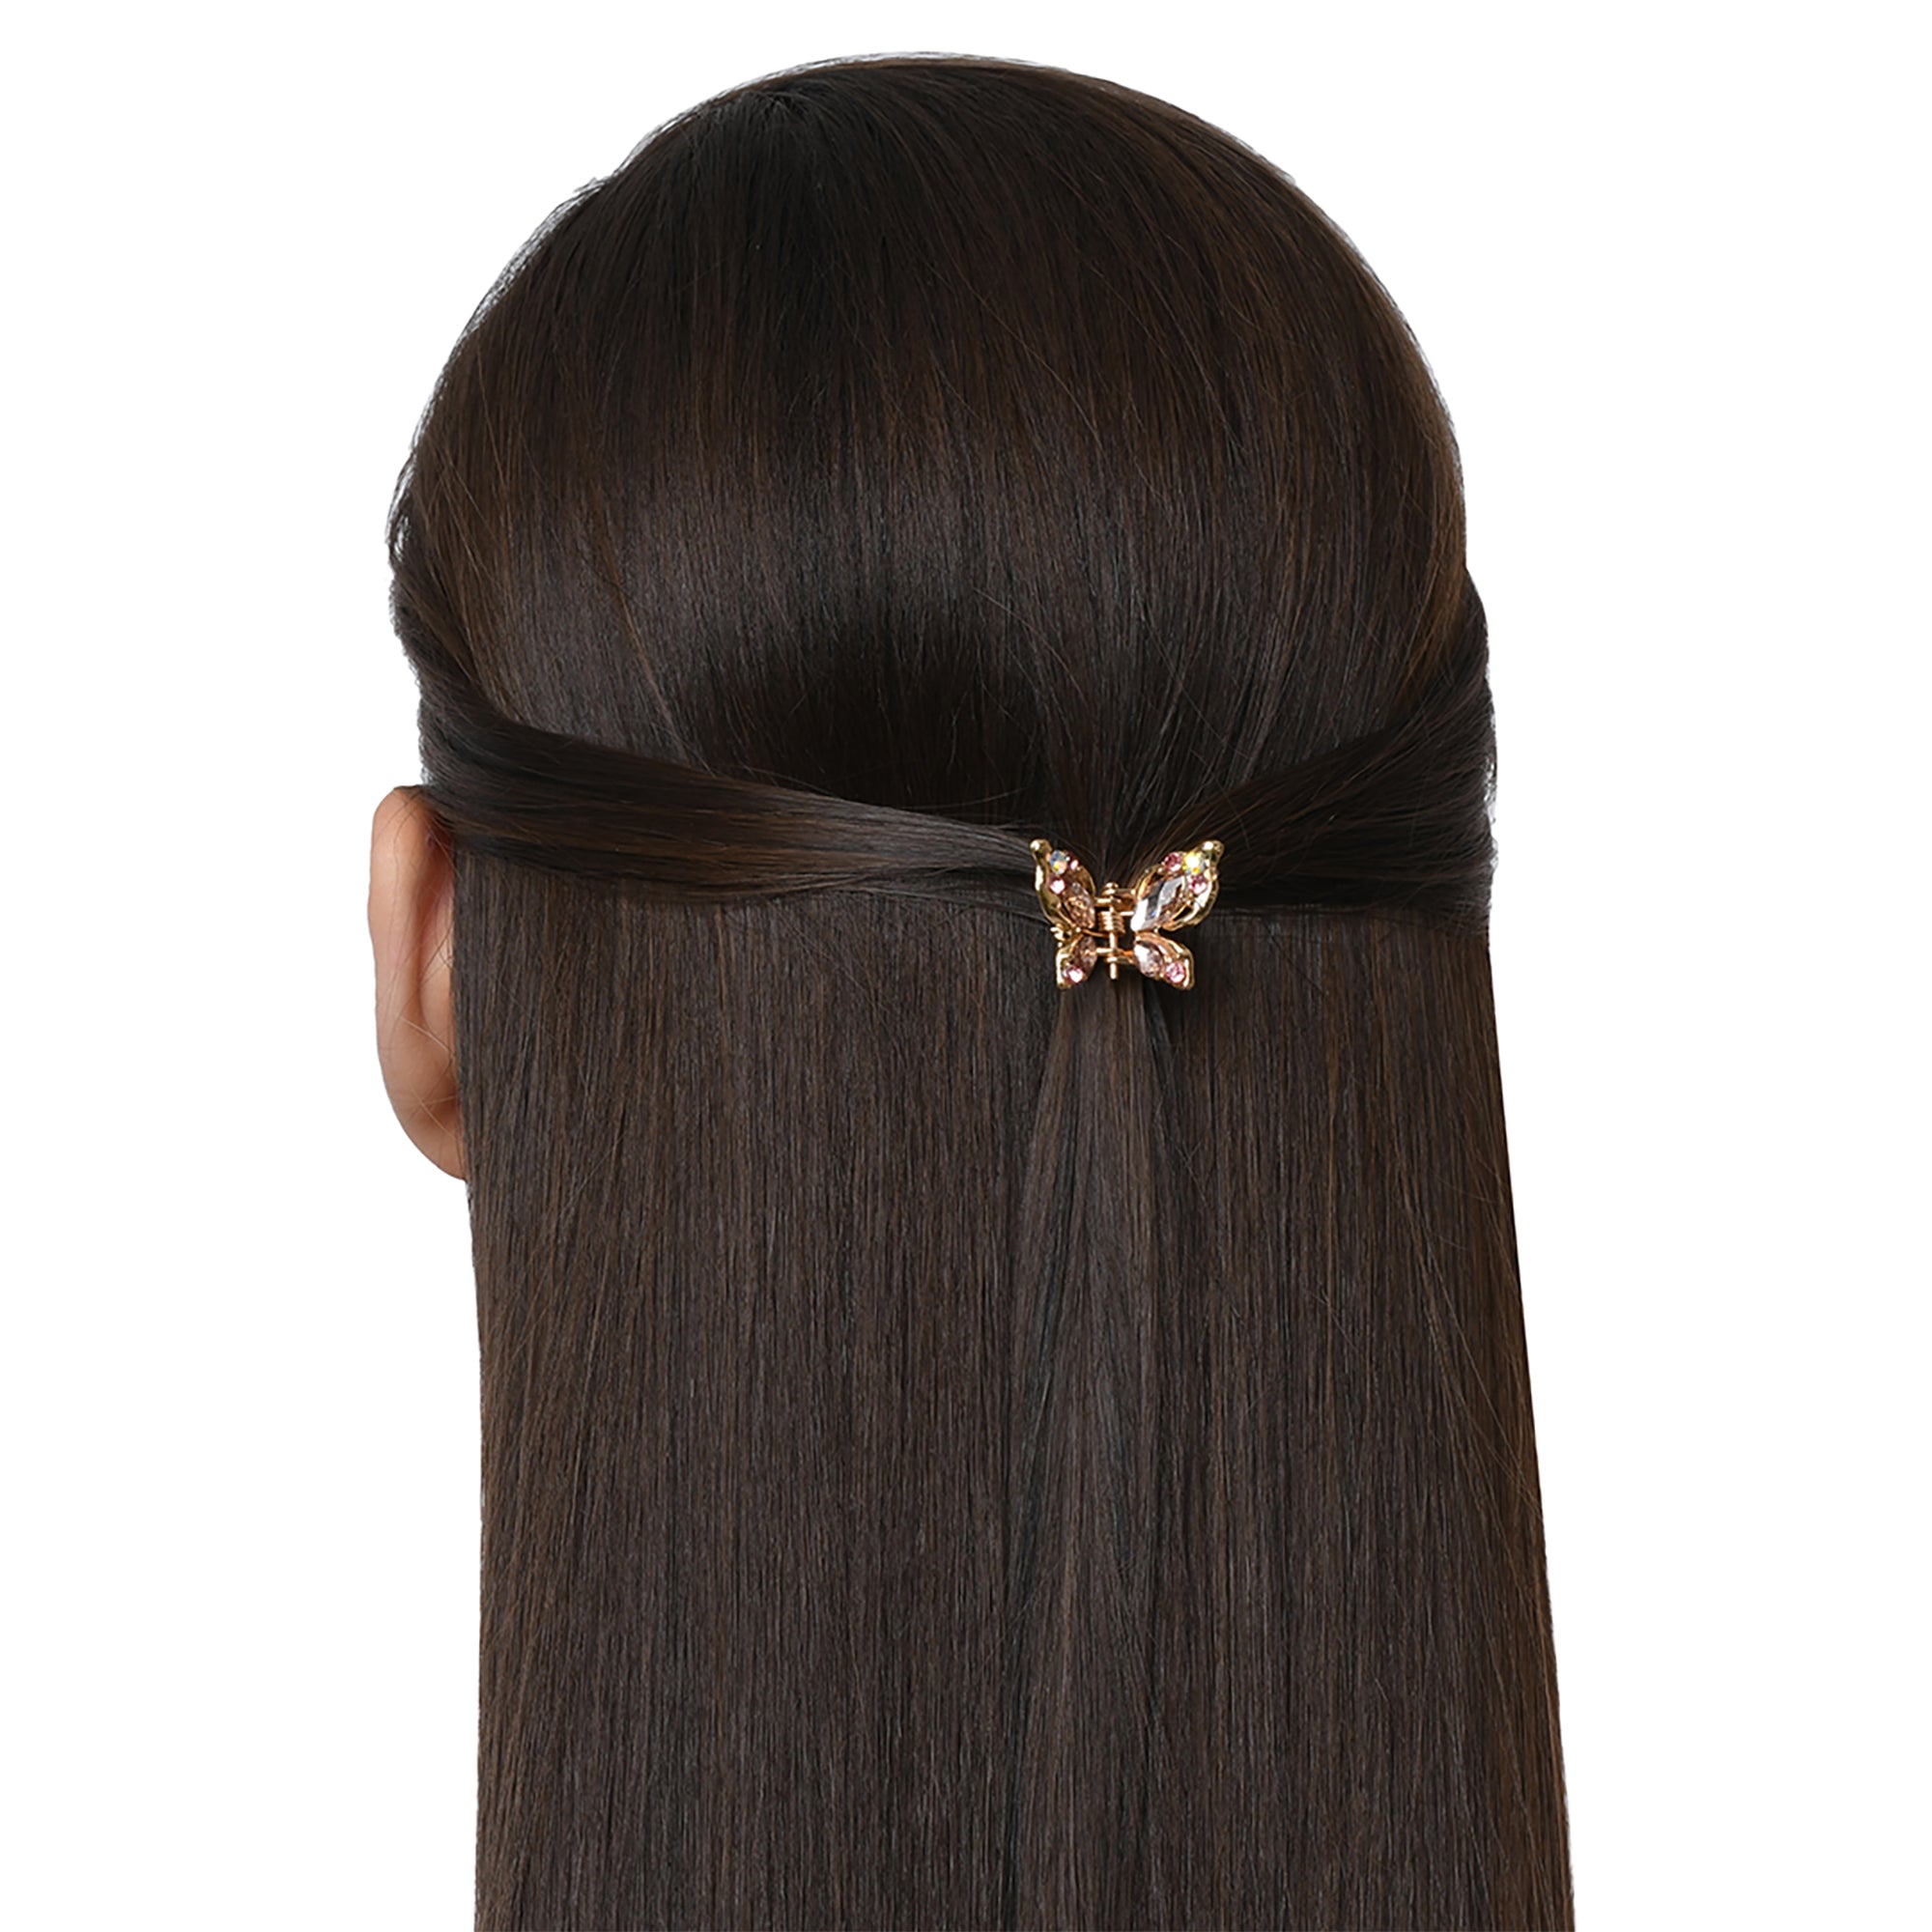 BUTTERFLY METALLIC HAIR CLIP/ACCESSORY ITEAM CODE-B-H-4 PRICE: Rs